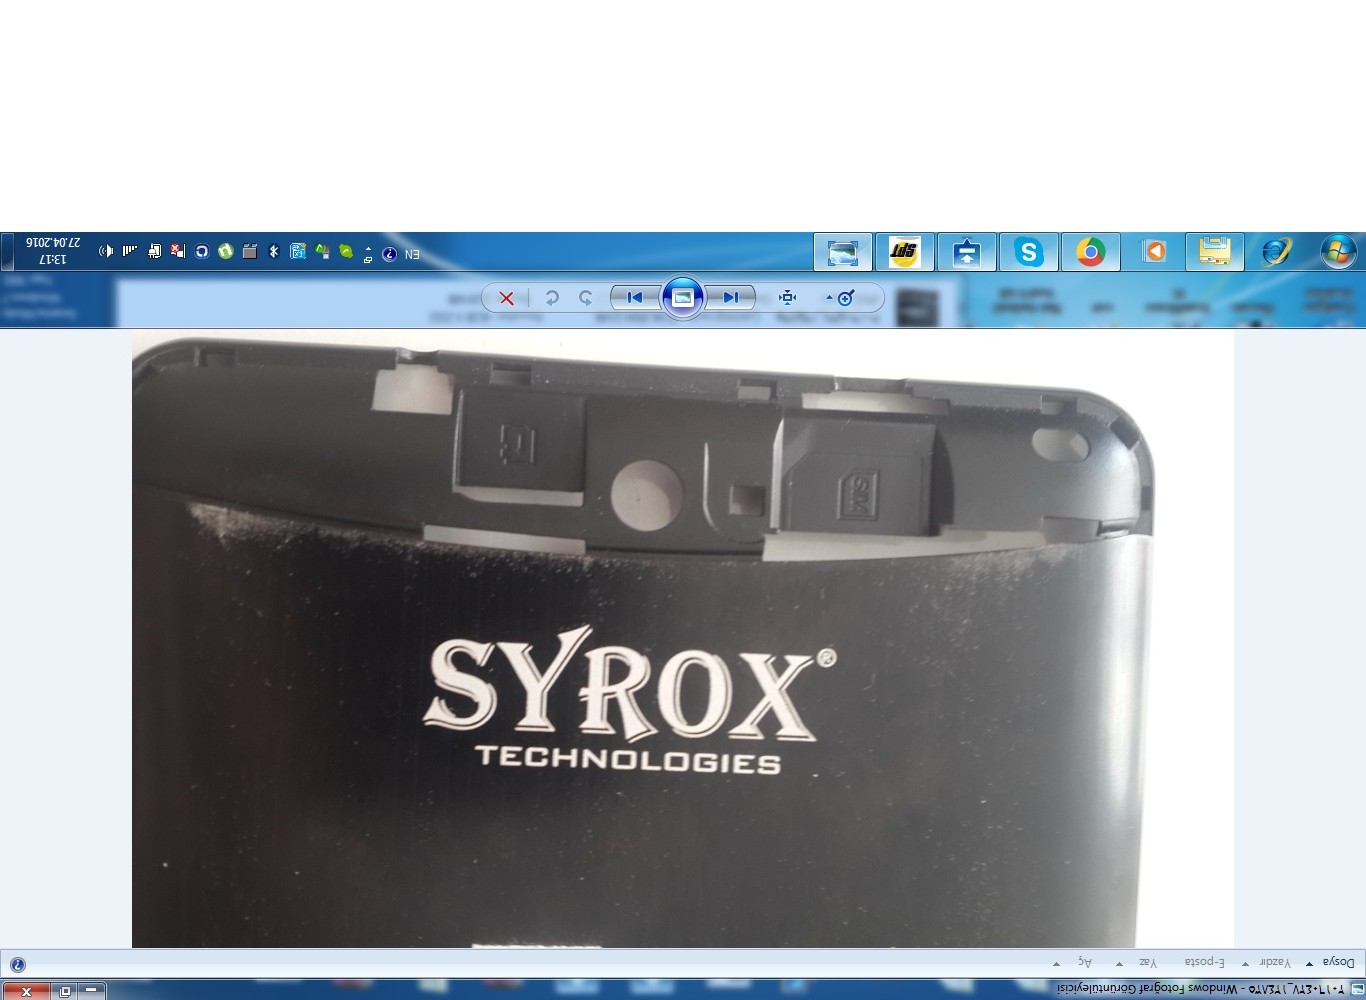 syrox syx-t704 firmware